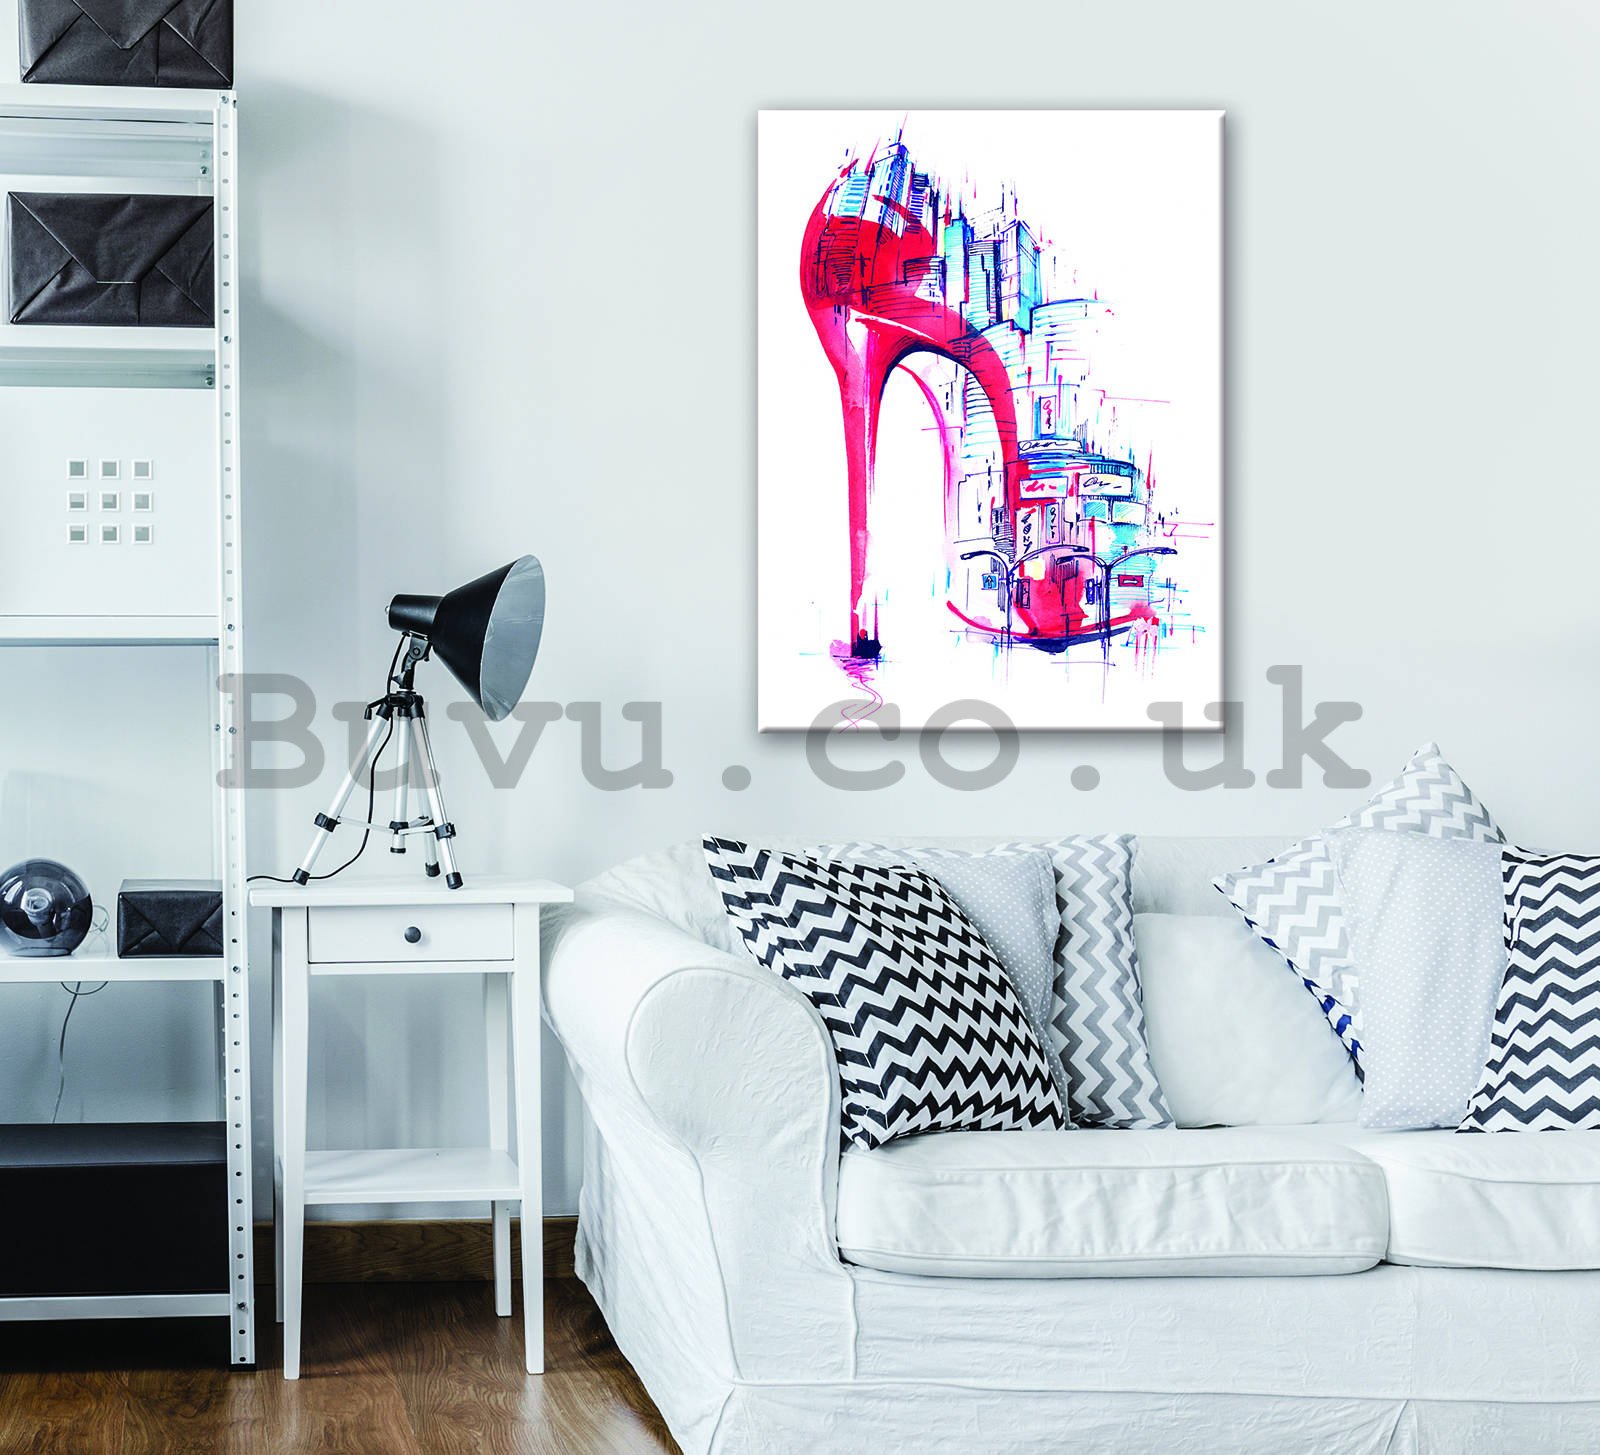 Painting on canvas: Shoe (abstract painting) - 80x60 cm